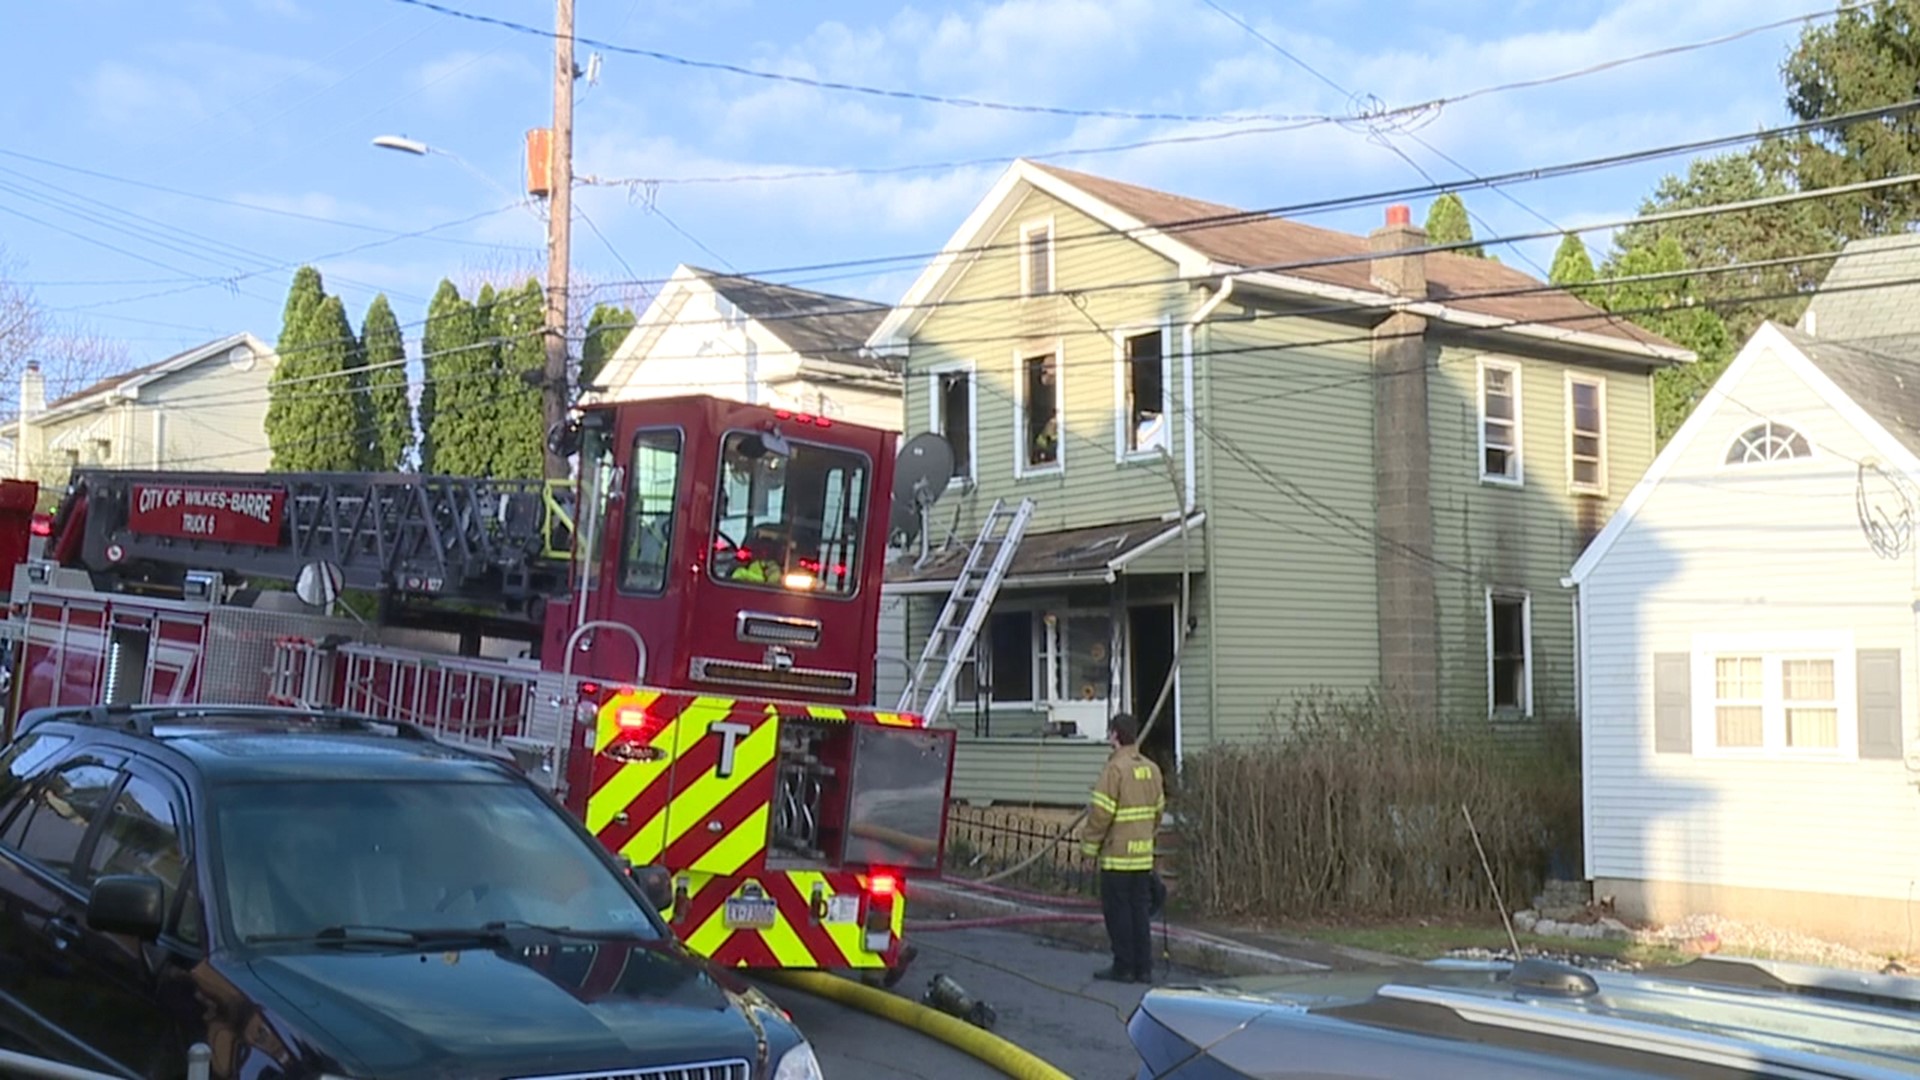 Crews were called to the home along Frederick Street Saturday morning. The fire inspector said it was started by a space heater plugged into an extension cord.